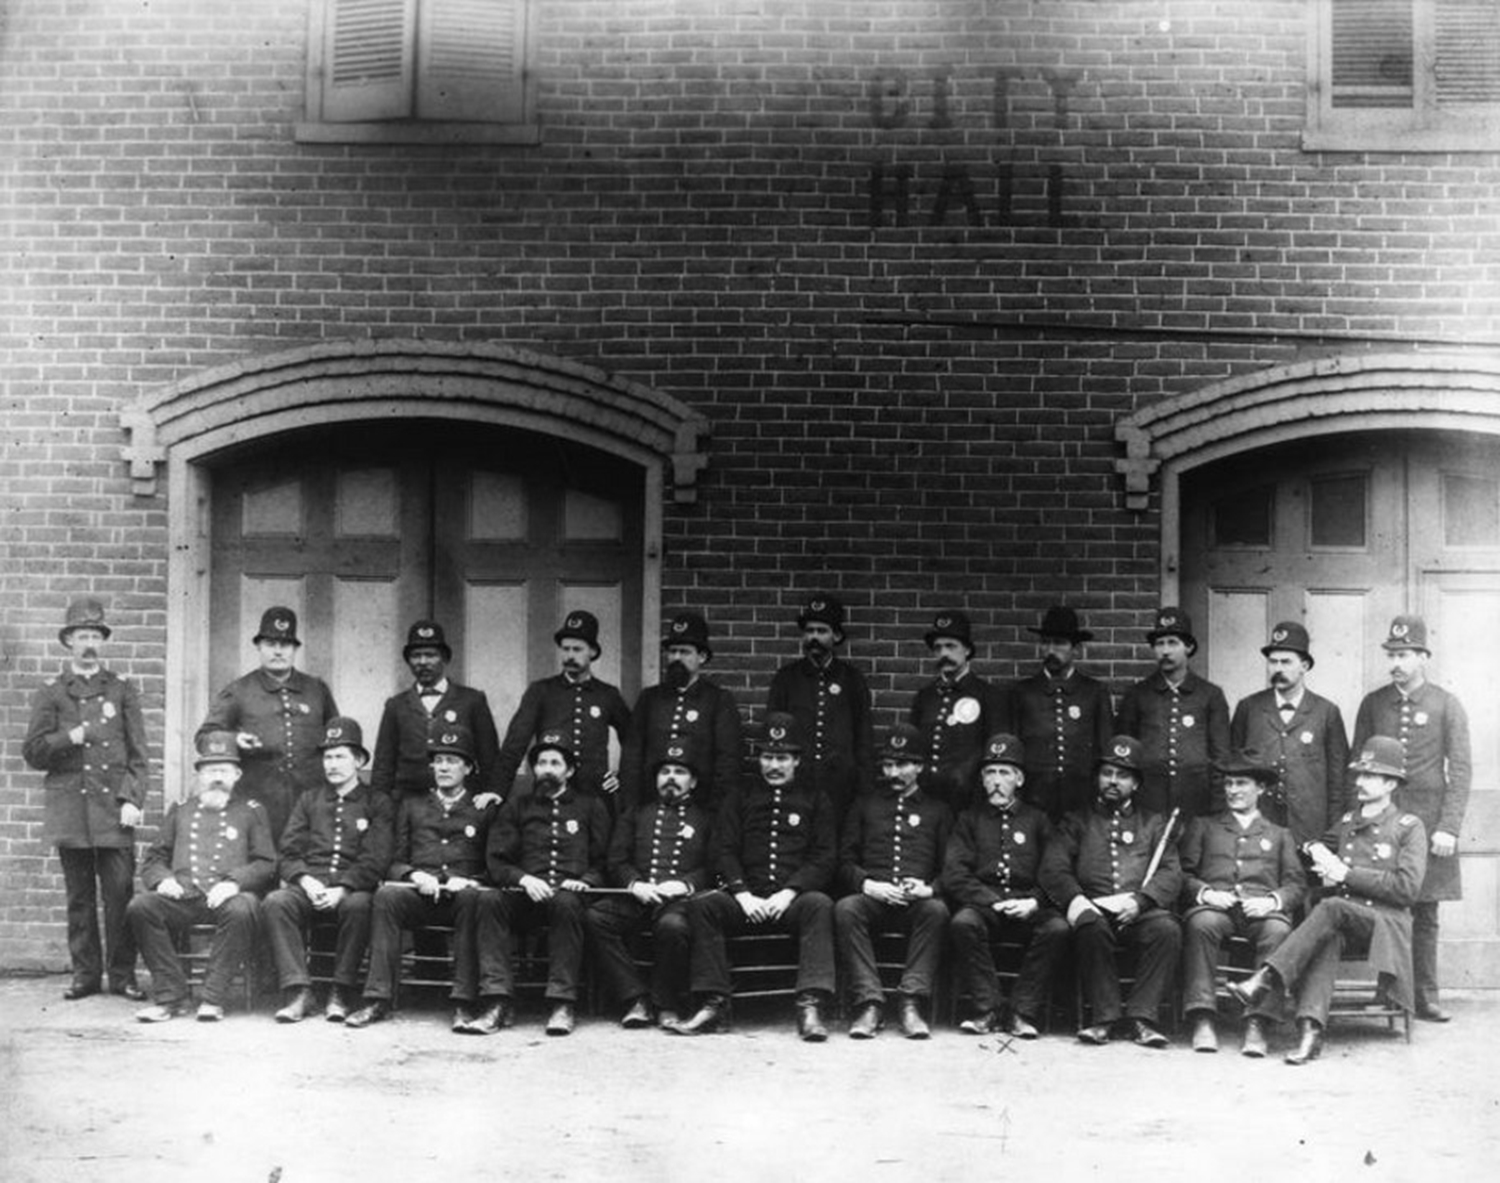 Knoxville Policemen, circa 1877, including two African American officers: James Mason is third from left (standing) and was known to be a former slave. The other officer, third from right (seated) is unknown. (McClung Historical Collection)